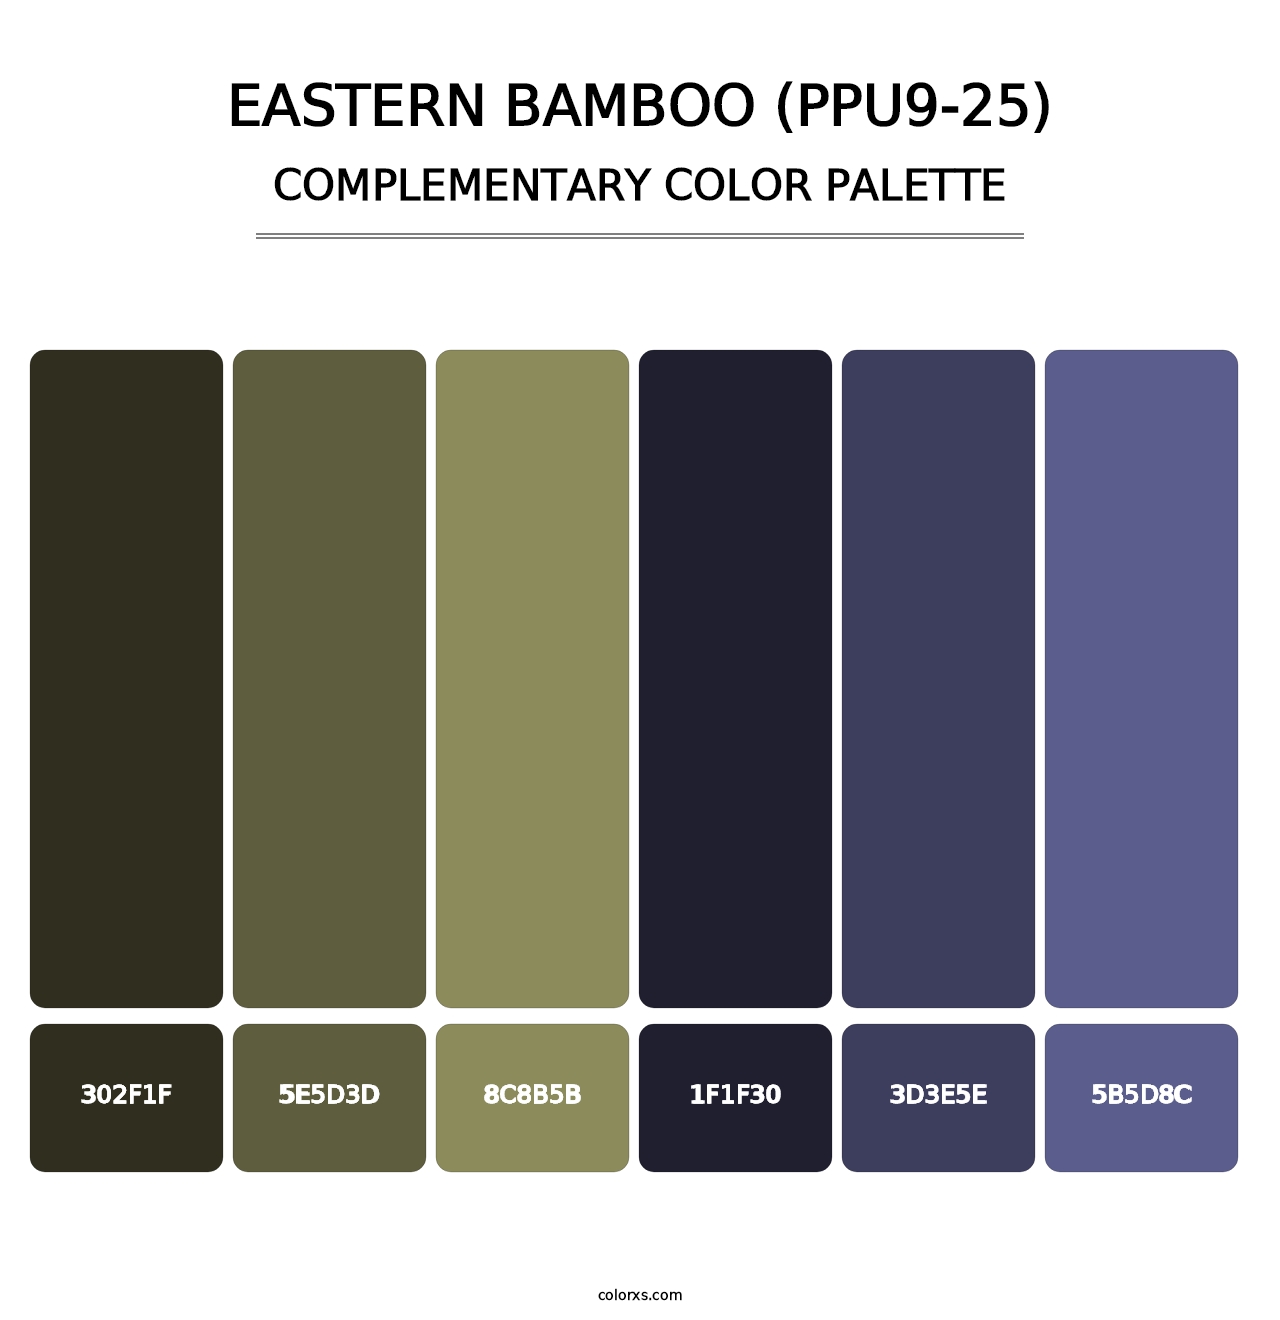 Eastern Bamboo (PPU9-25) - Complementary Color Palette